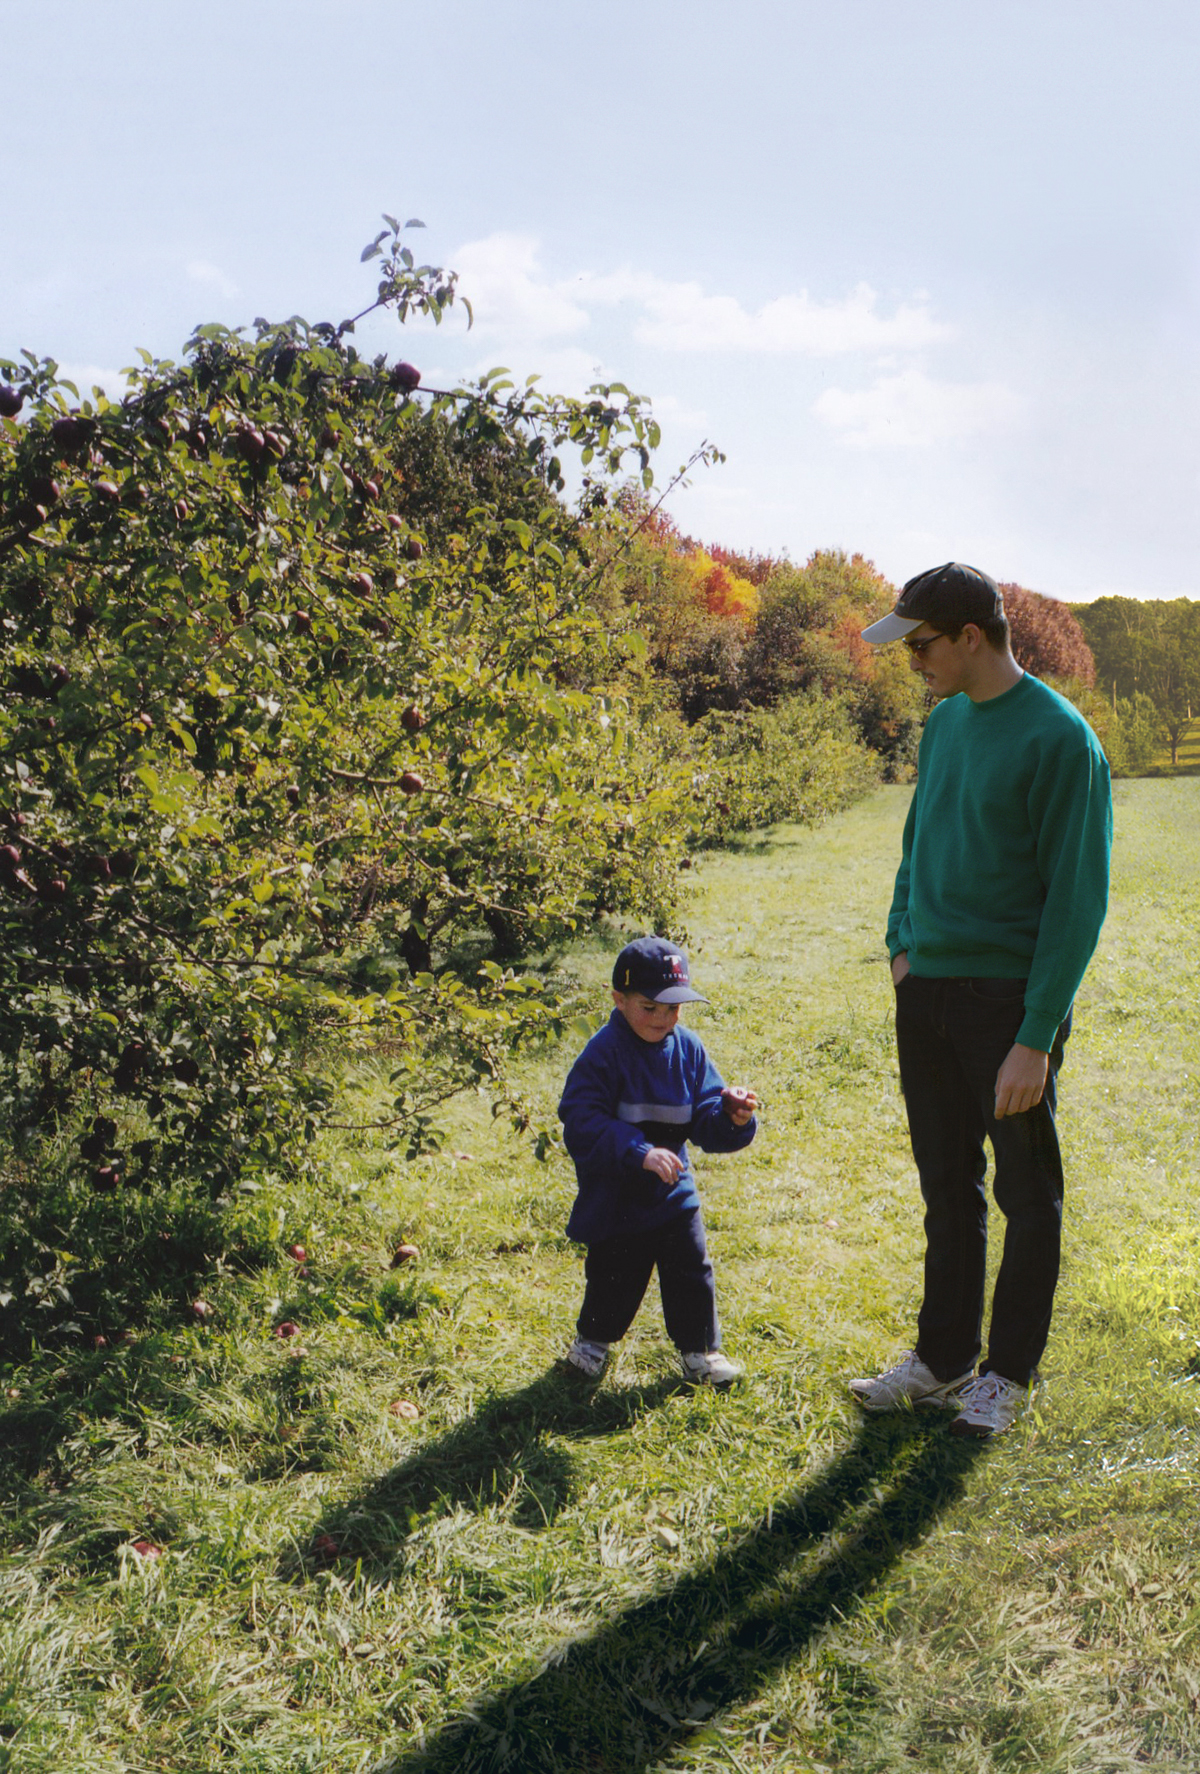 Conor and his younger self in an orchard